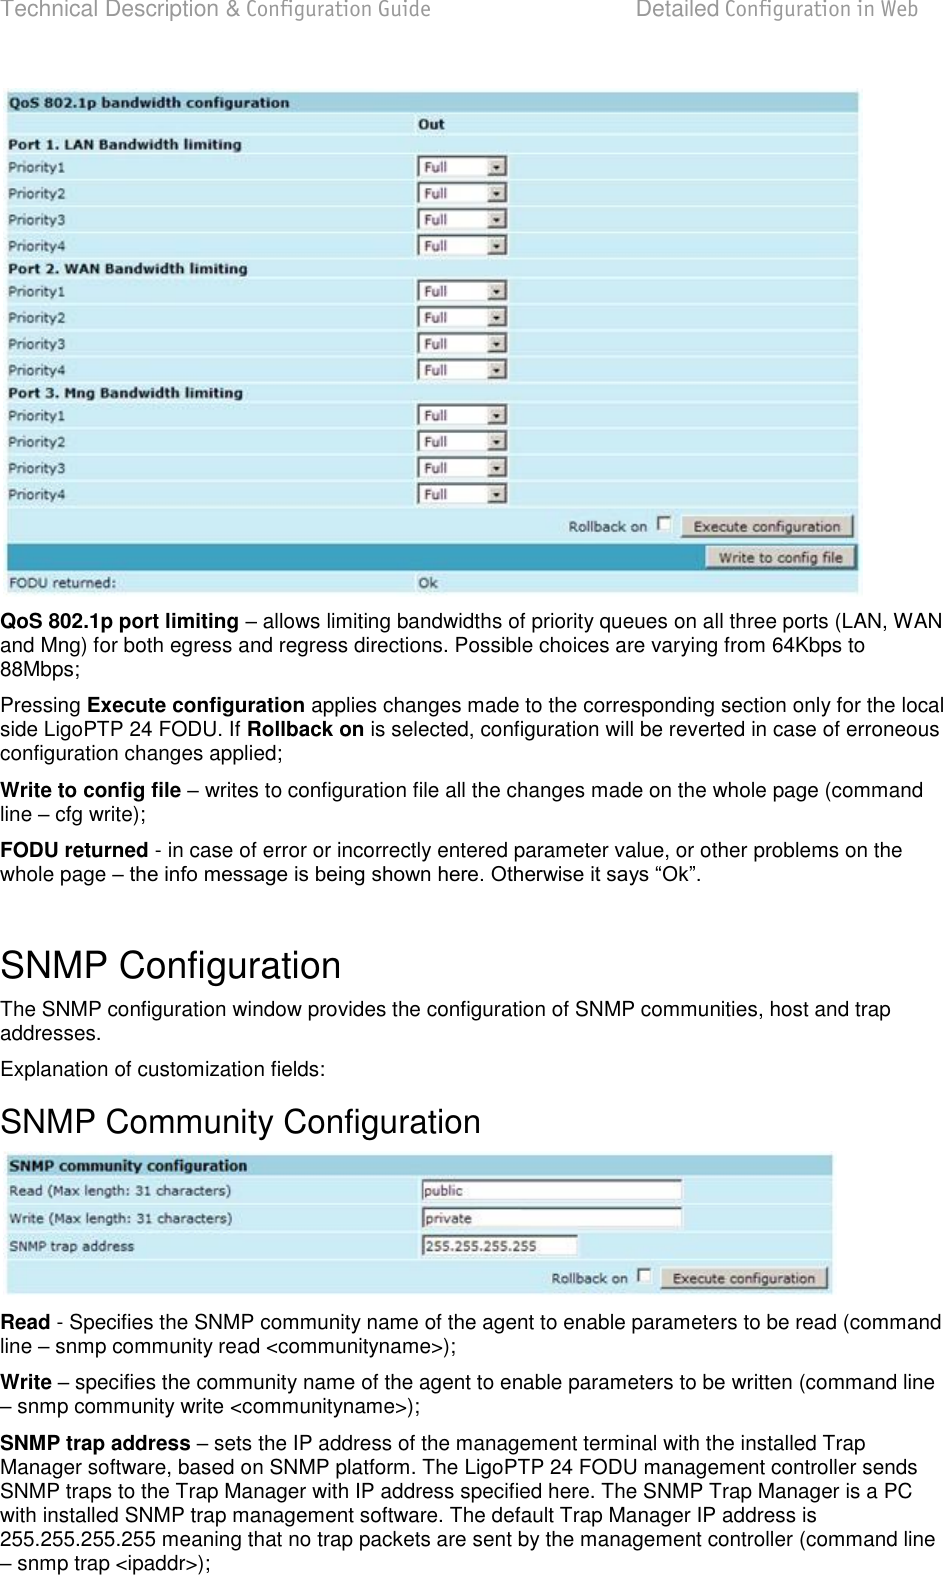 Technical Description &amp; Configuration Guide  Detailed Configuration in Web  LigoWave  Page 57  QoS 802.1p port limiting  allows limiting bandwidths of priority queues on all three ports (LAN, WAN and Mng) for both egress and regress directions. Possible choices are varying from 64Kbps to 88Mbps; Pressing Execute configuration applies changes made to the corresponding section only for the local side LigoPTP 24 FODU. If Rollback on is selected, configuration will be reverted in case of erroneous configuration changes applied; Write to config file  writes to configuration file all the changes made on the whole page (command line  cfg write); FODU returned - in case of error or incorrectly entered parameter value, or other problems on the whole page    SNMP Configuration The SNMP configuration window provides the configuration of SNMP communities, host and trap addresses. Explanation of customization fields: SNMP Community Configuration  Read - Specifies the SNMP community name of the agent to enable parameters to be read (command line  snmp community read &lt;communityname&gt;); Write  specifies the community name of the agent to enable parameters to be written (command line  snmp community write &lt;communityname&gt;); SNMP trap address  sets the IP address of the management terminal with the installed Trap Manager software, based on SNMP platform. The LigoPTP 24 FODU management controller sends SNMP traps to the Trap Manager with IP address specified here. The SNMP Trap Manager is a PC with installed SNMP trap management software. The default Trap Manager IP address is 255.255.255.255 meaning that no trap packets are sent by the management controller (command line  snmp trap &lt;ipaddr&gt;); 